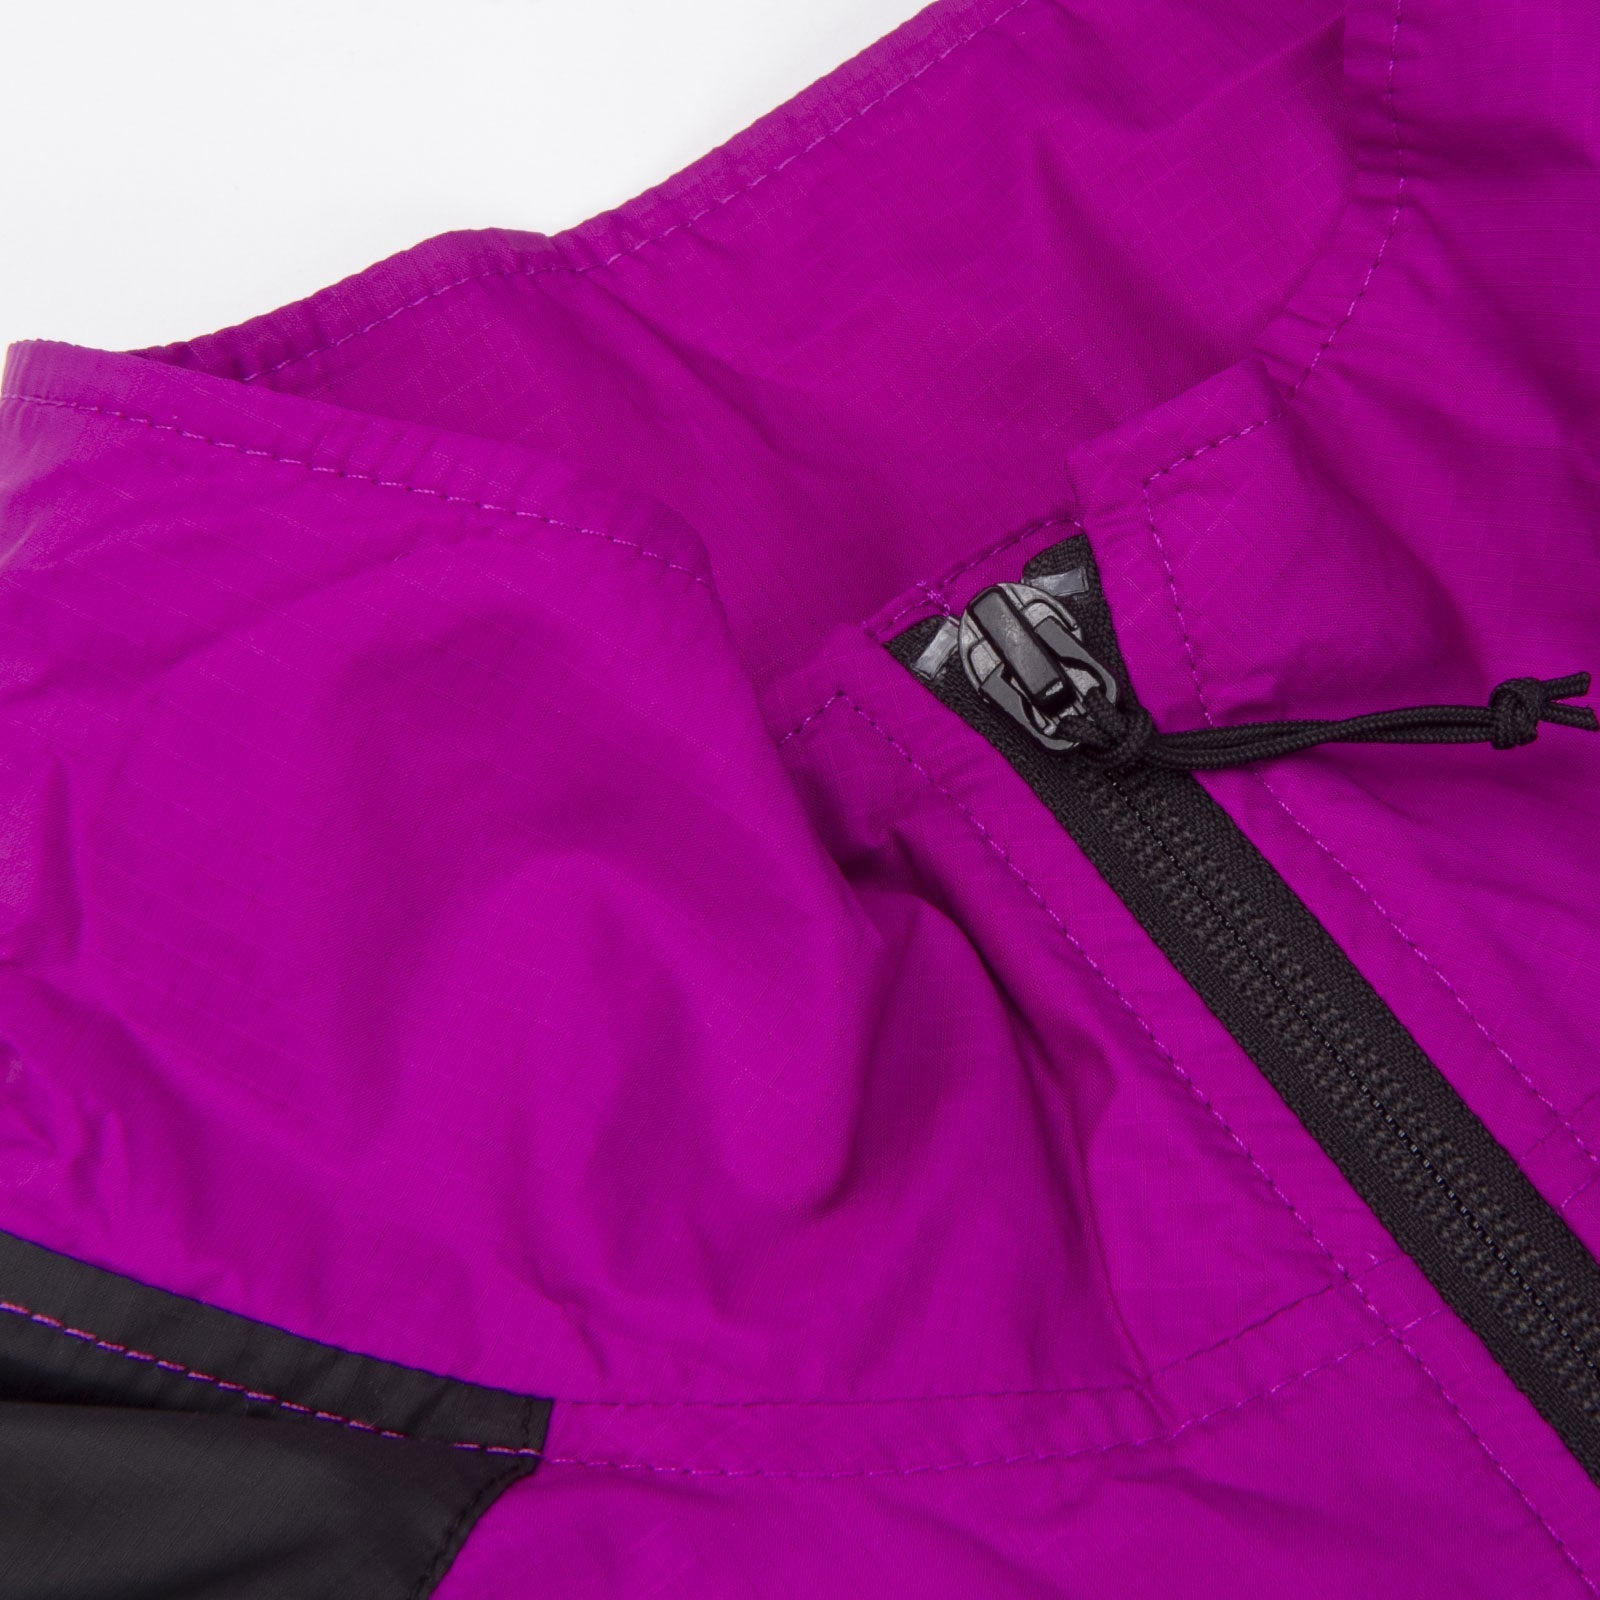 The North Face Tnf X Jacket Women’s-SUEDE Store